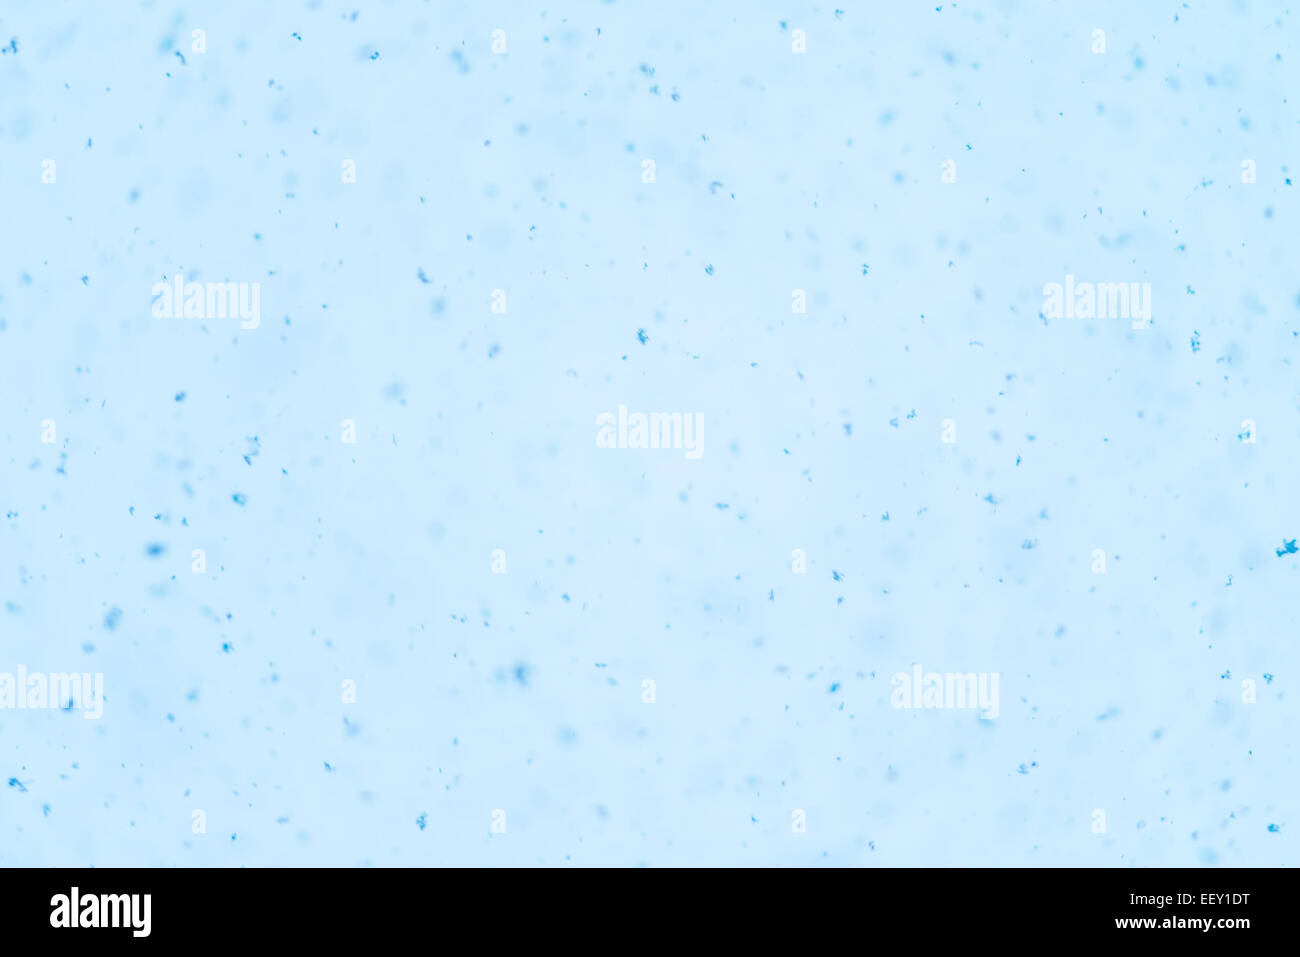 Snow flakes falling down from sky Stock Photo